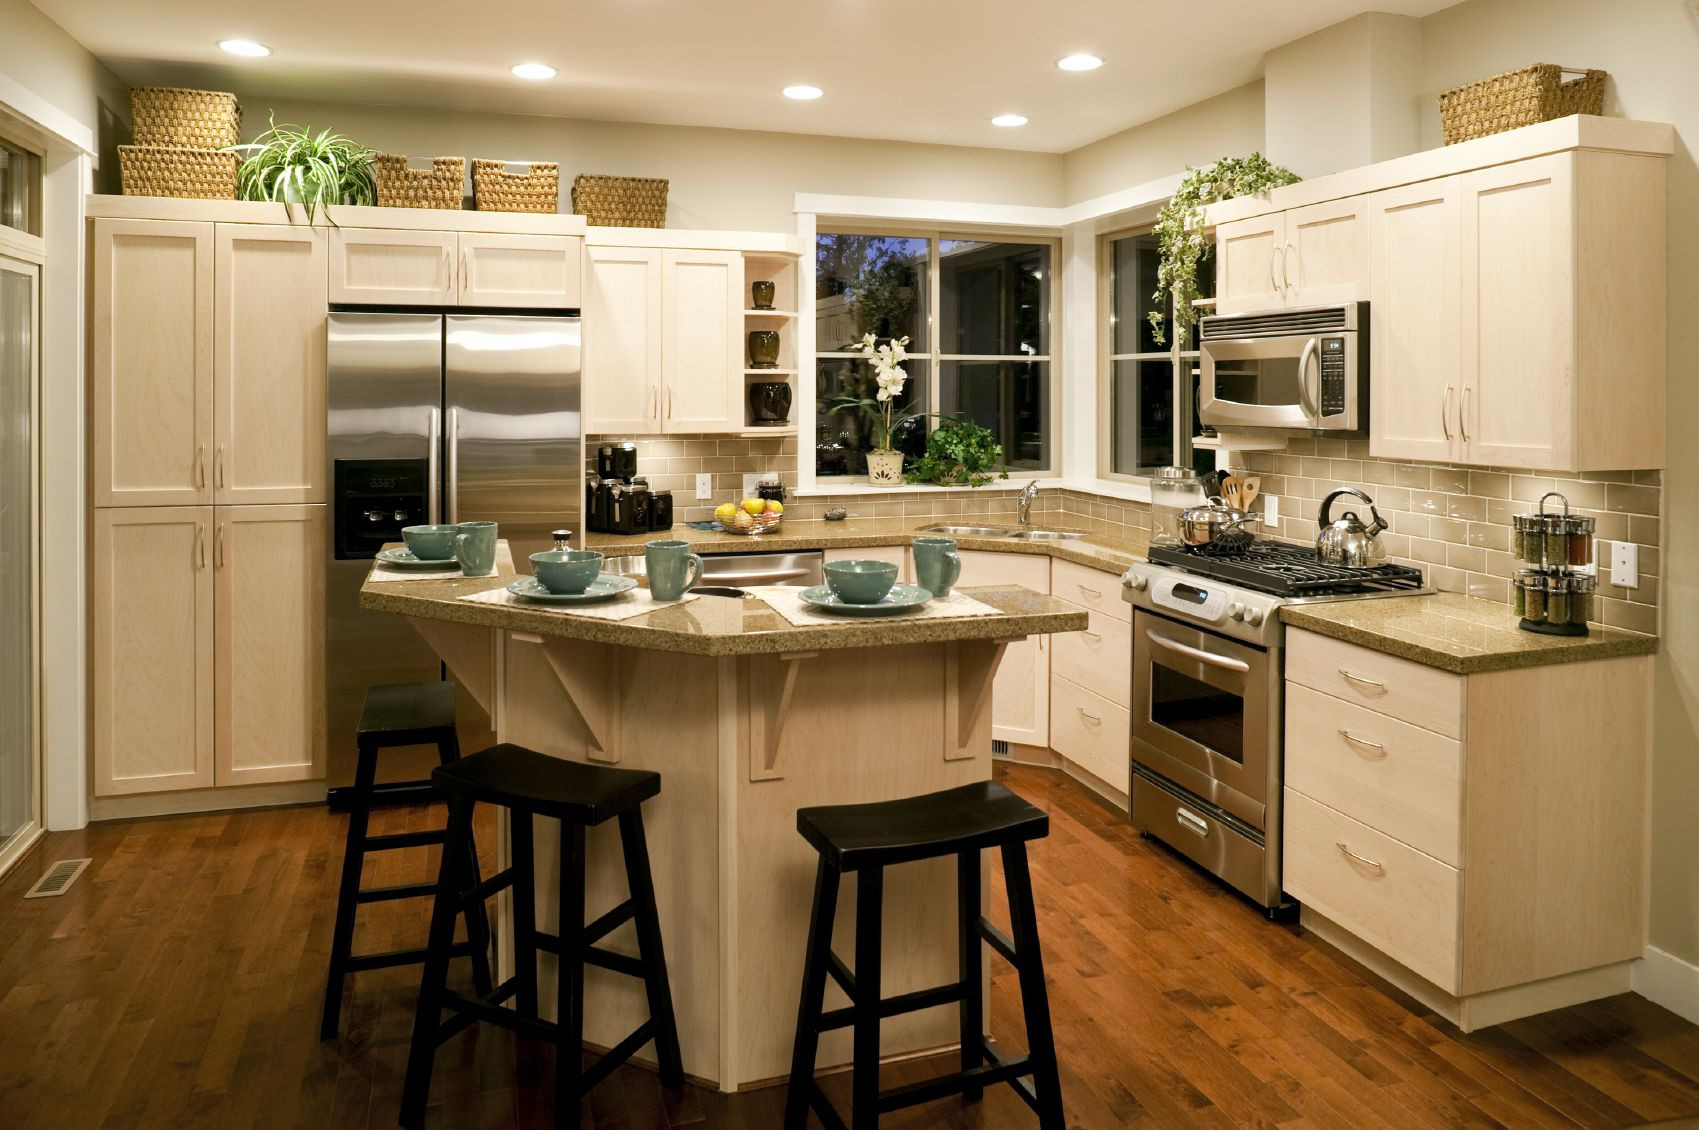 Kitchen Design Ideas With Island
 Awesome Kitchen Island Designs to Realize Well Designed